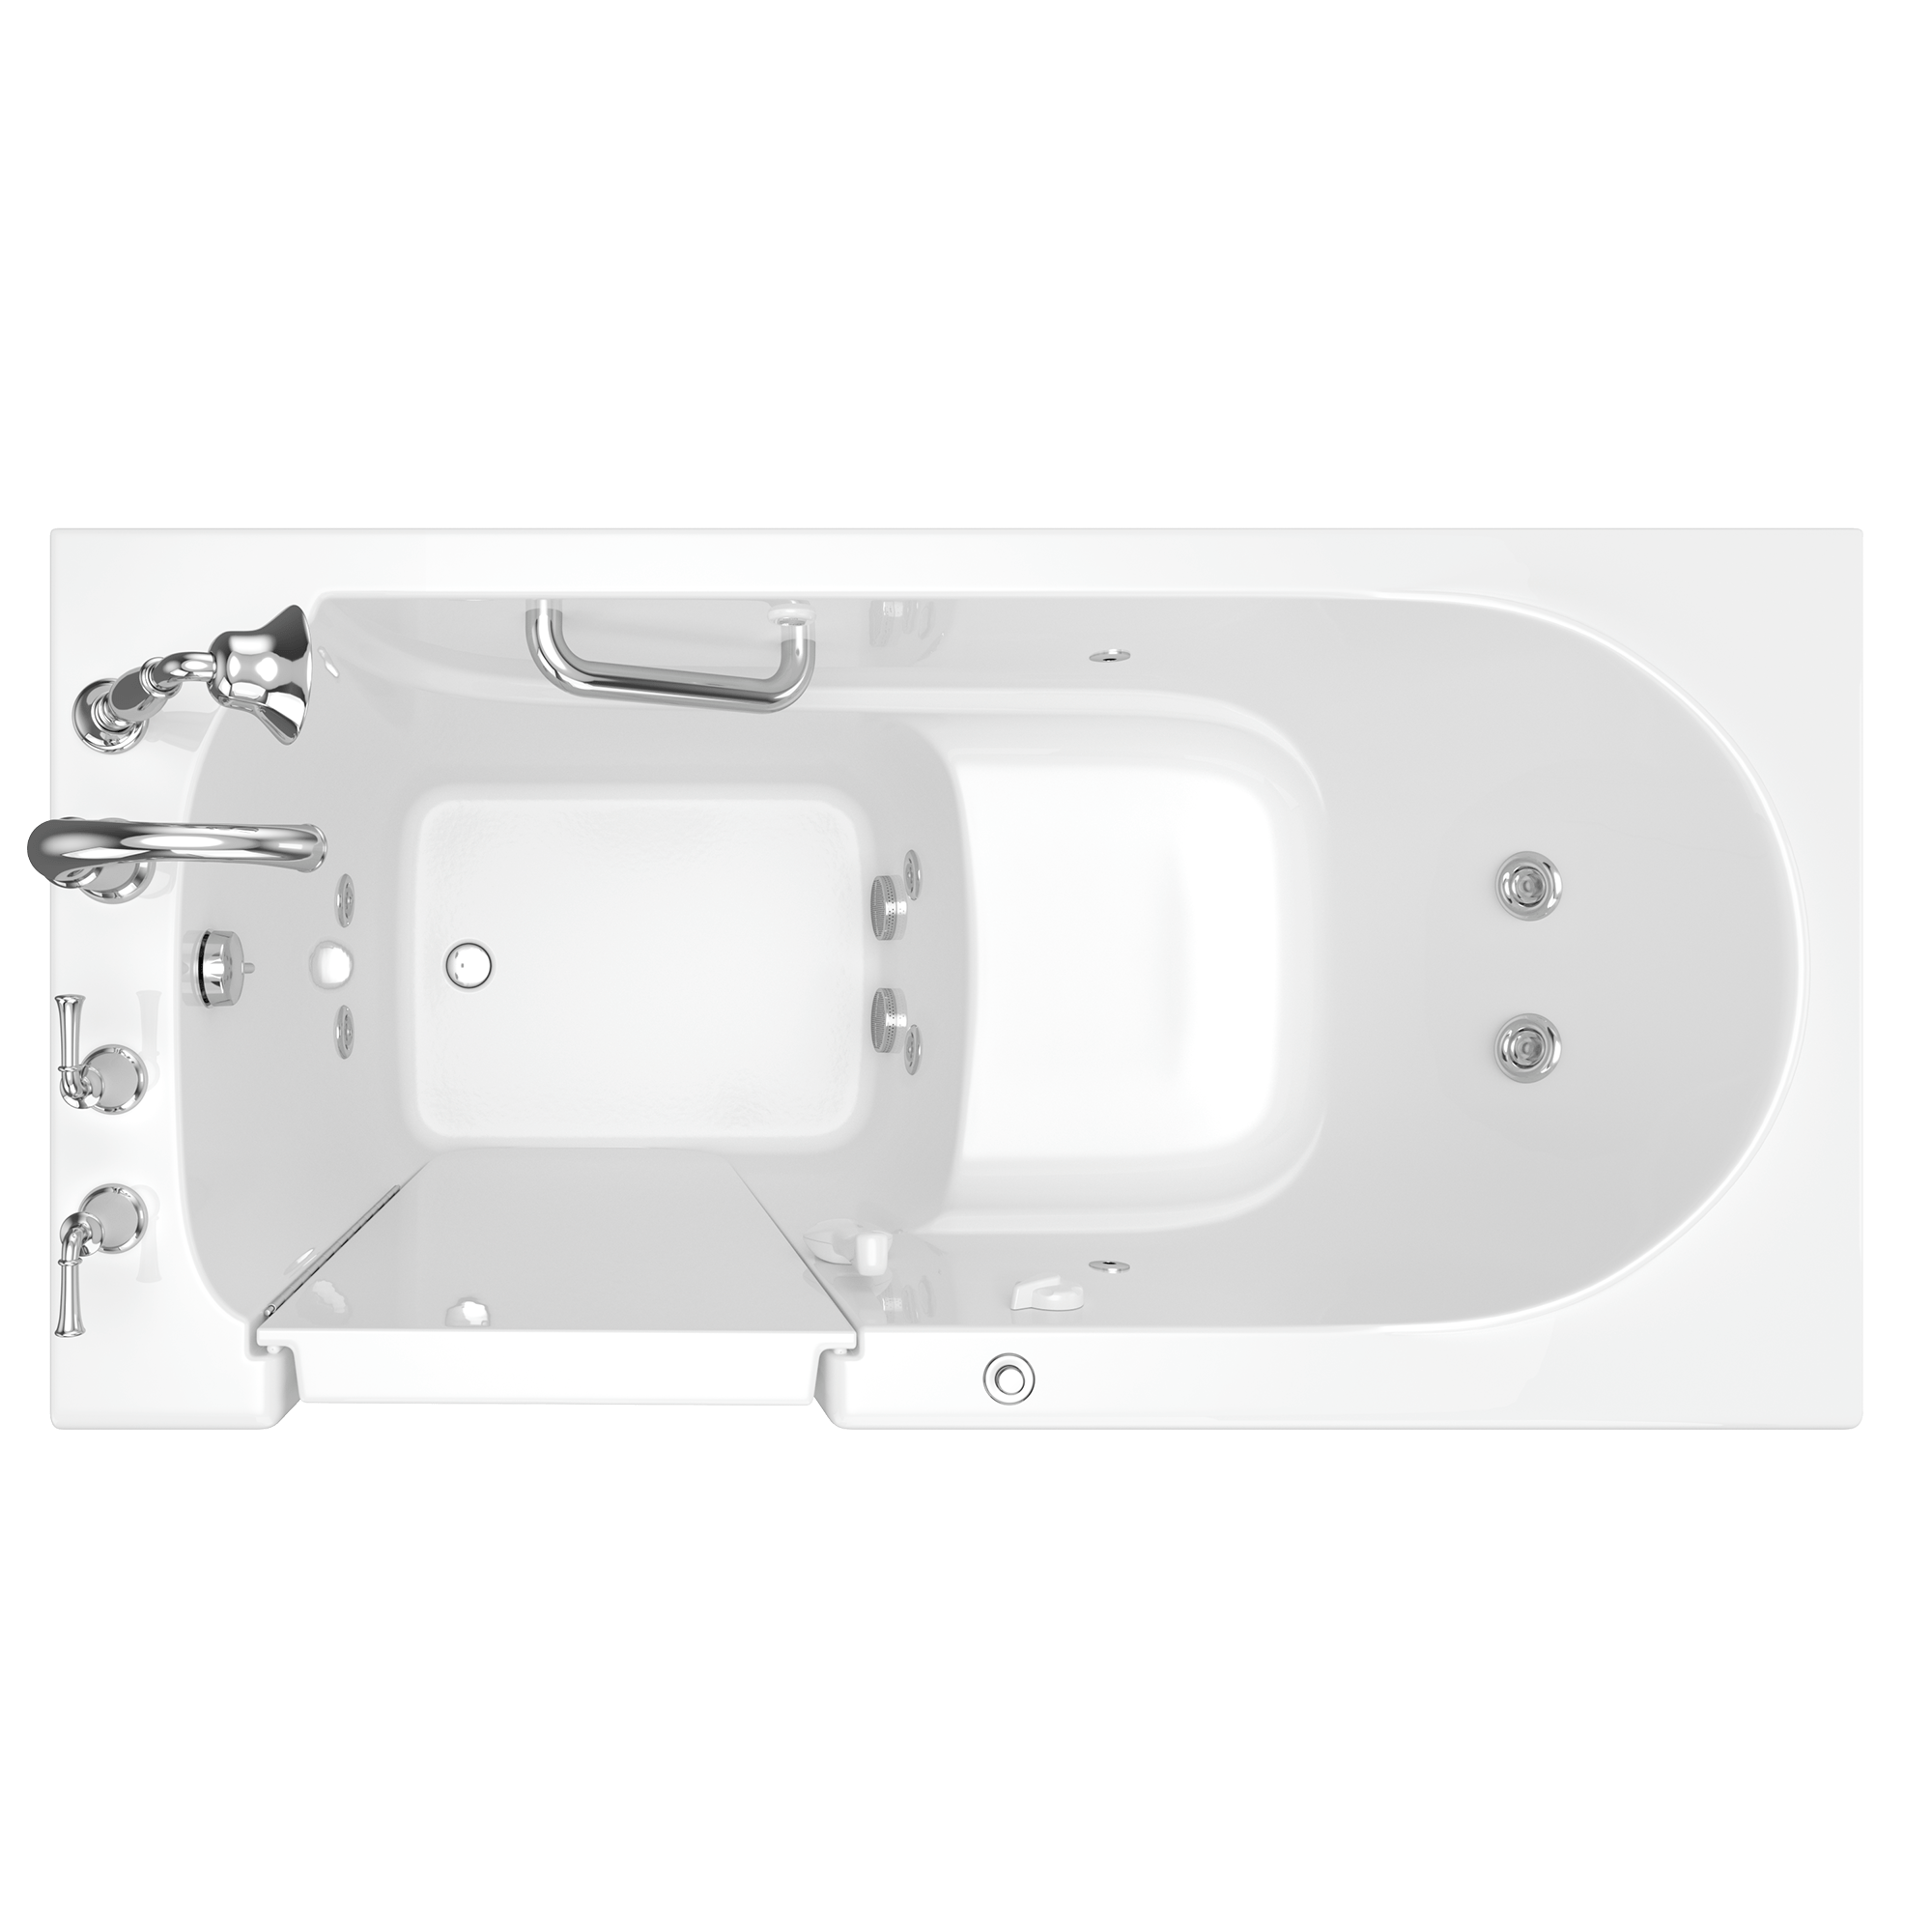 Gelcoat Value Series 60x30-Inch Walk-In Bathtub with Whirlpool Massage System - Left Hand Door and Drain